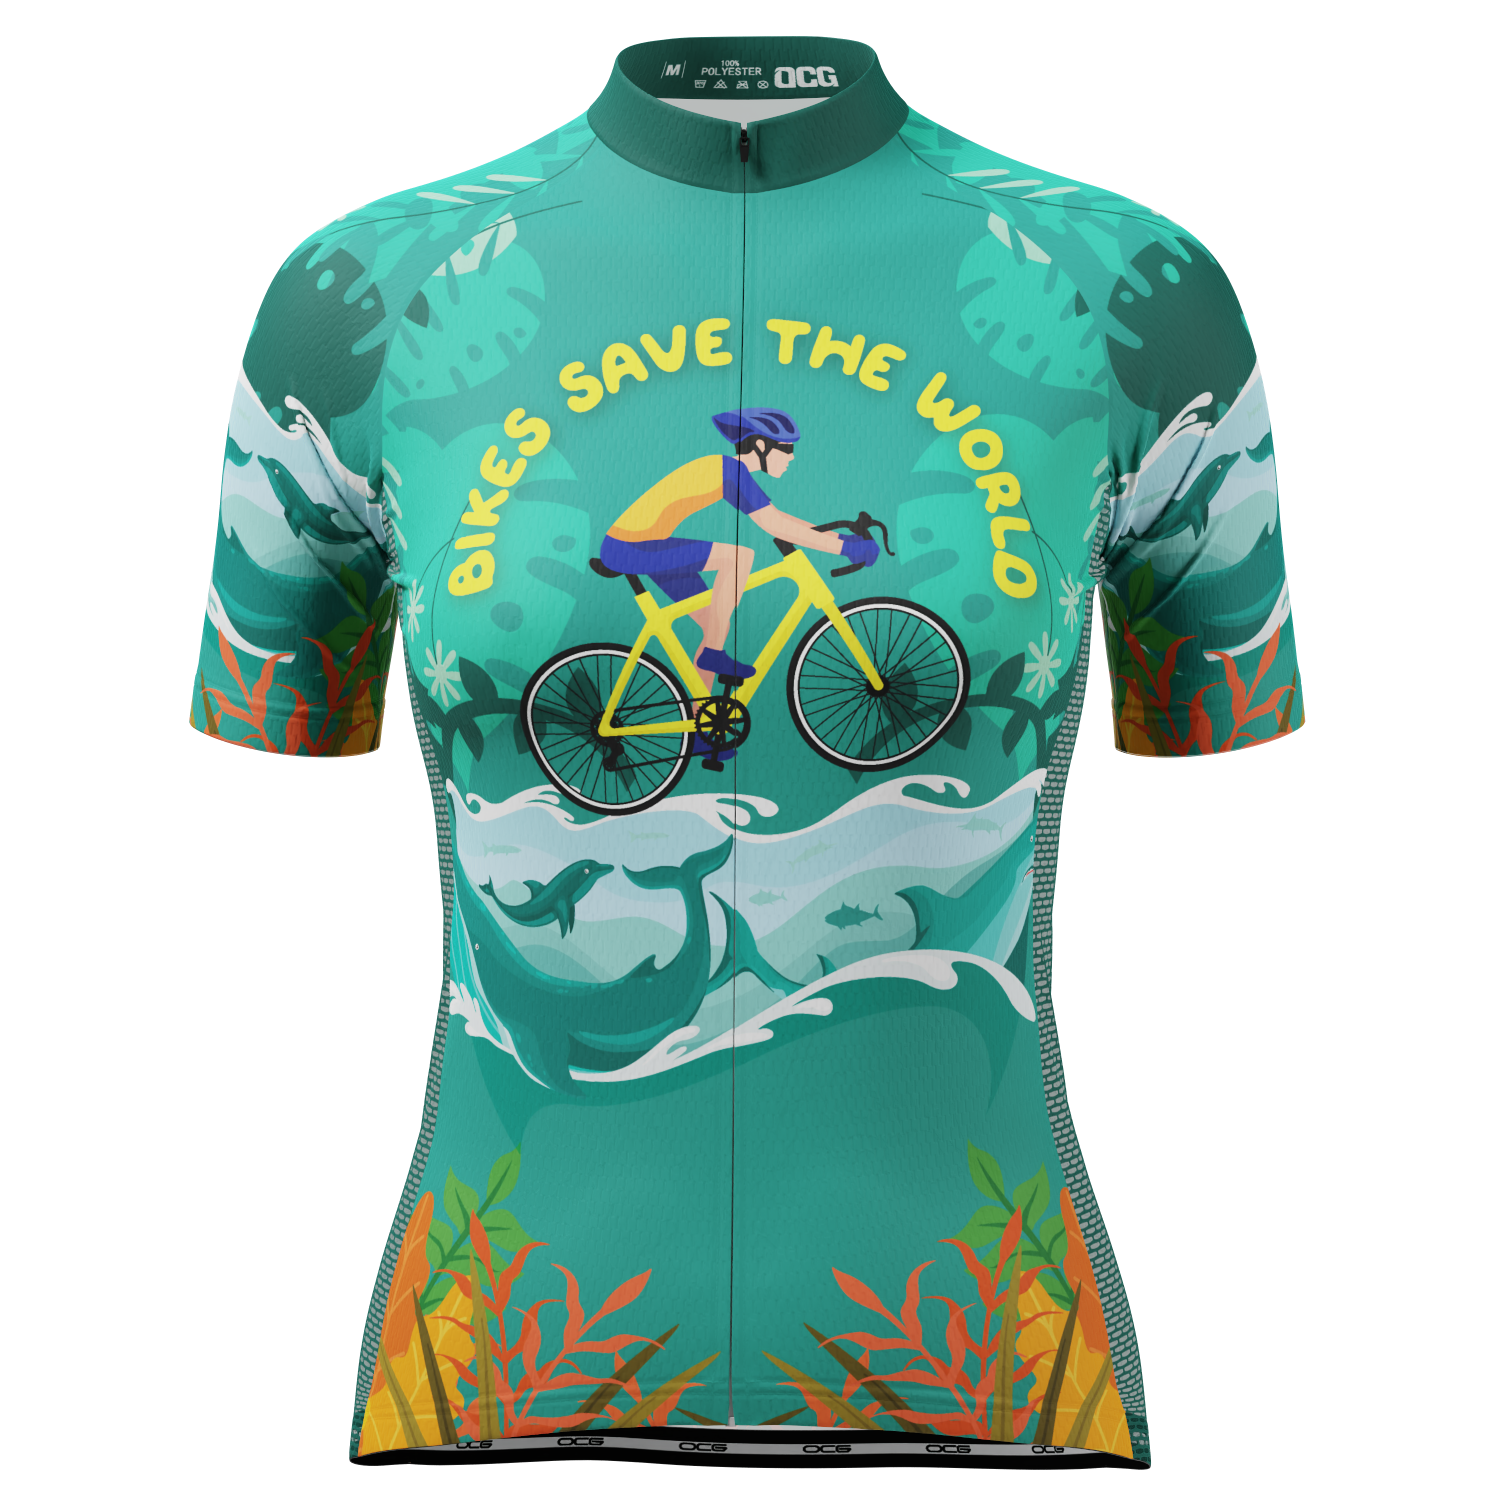 Women's Bikes Save The World Short Sleeve Cycling Jersey